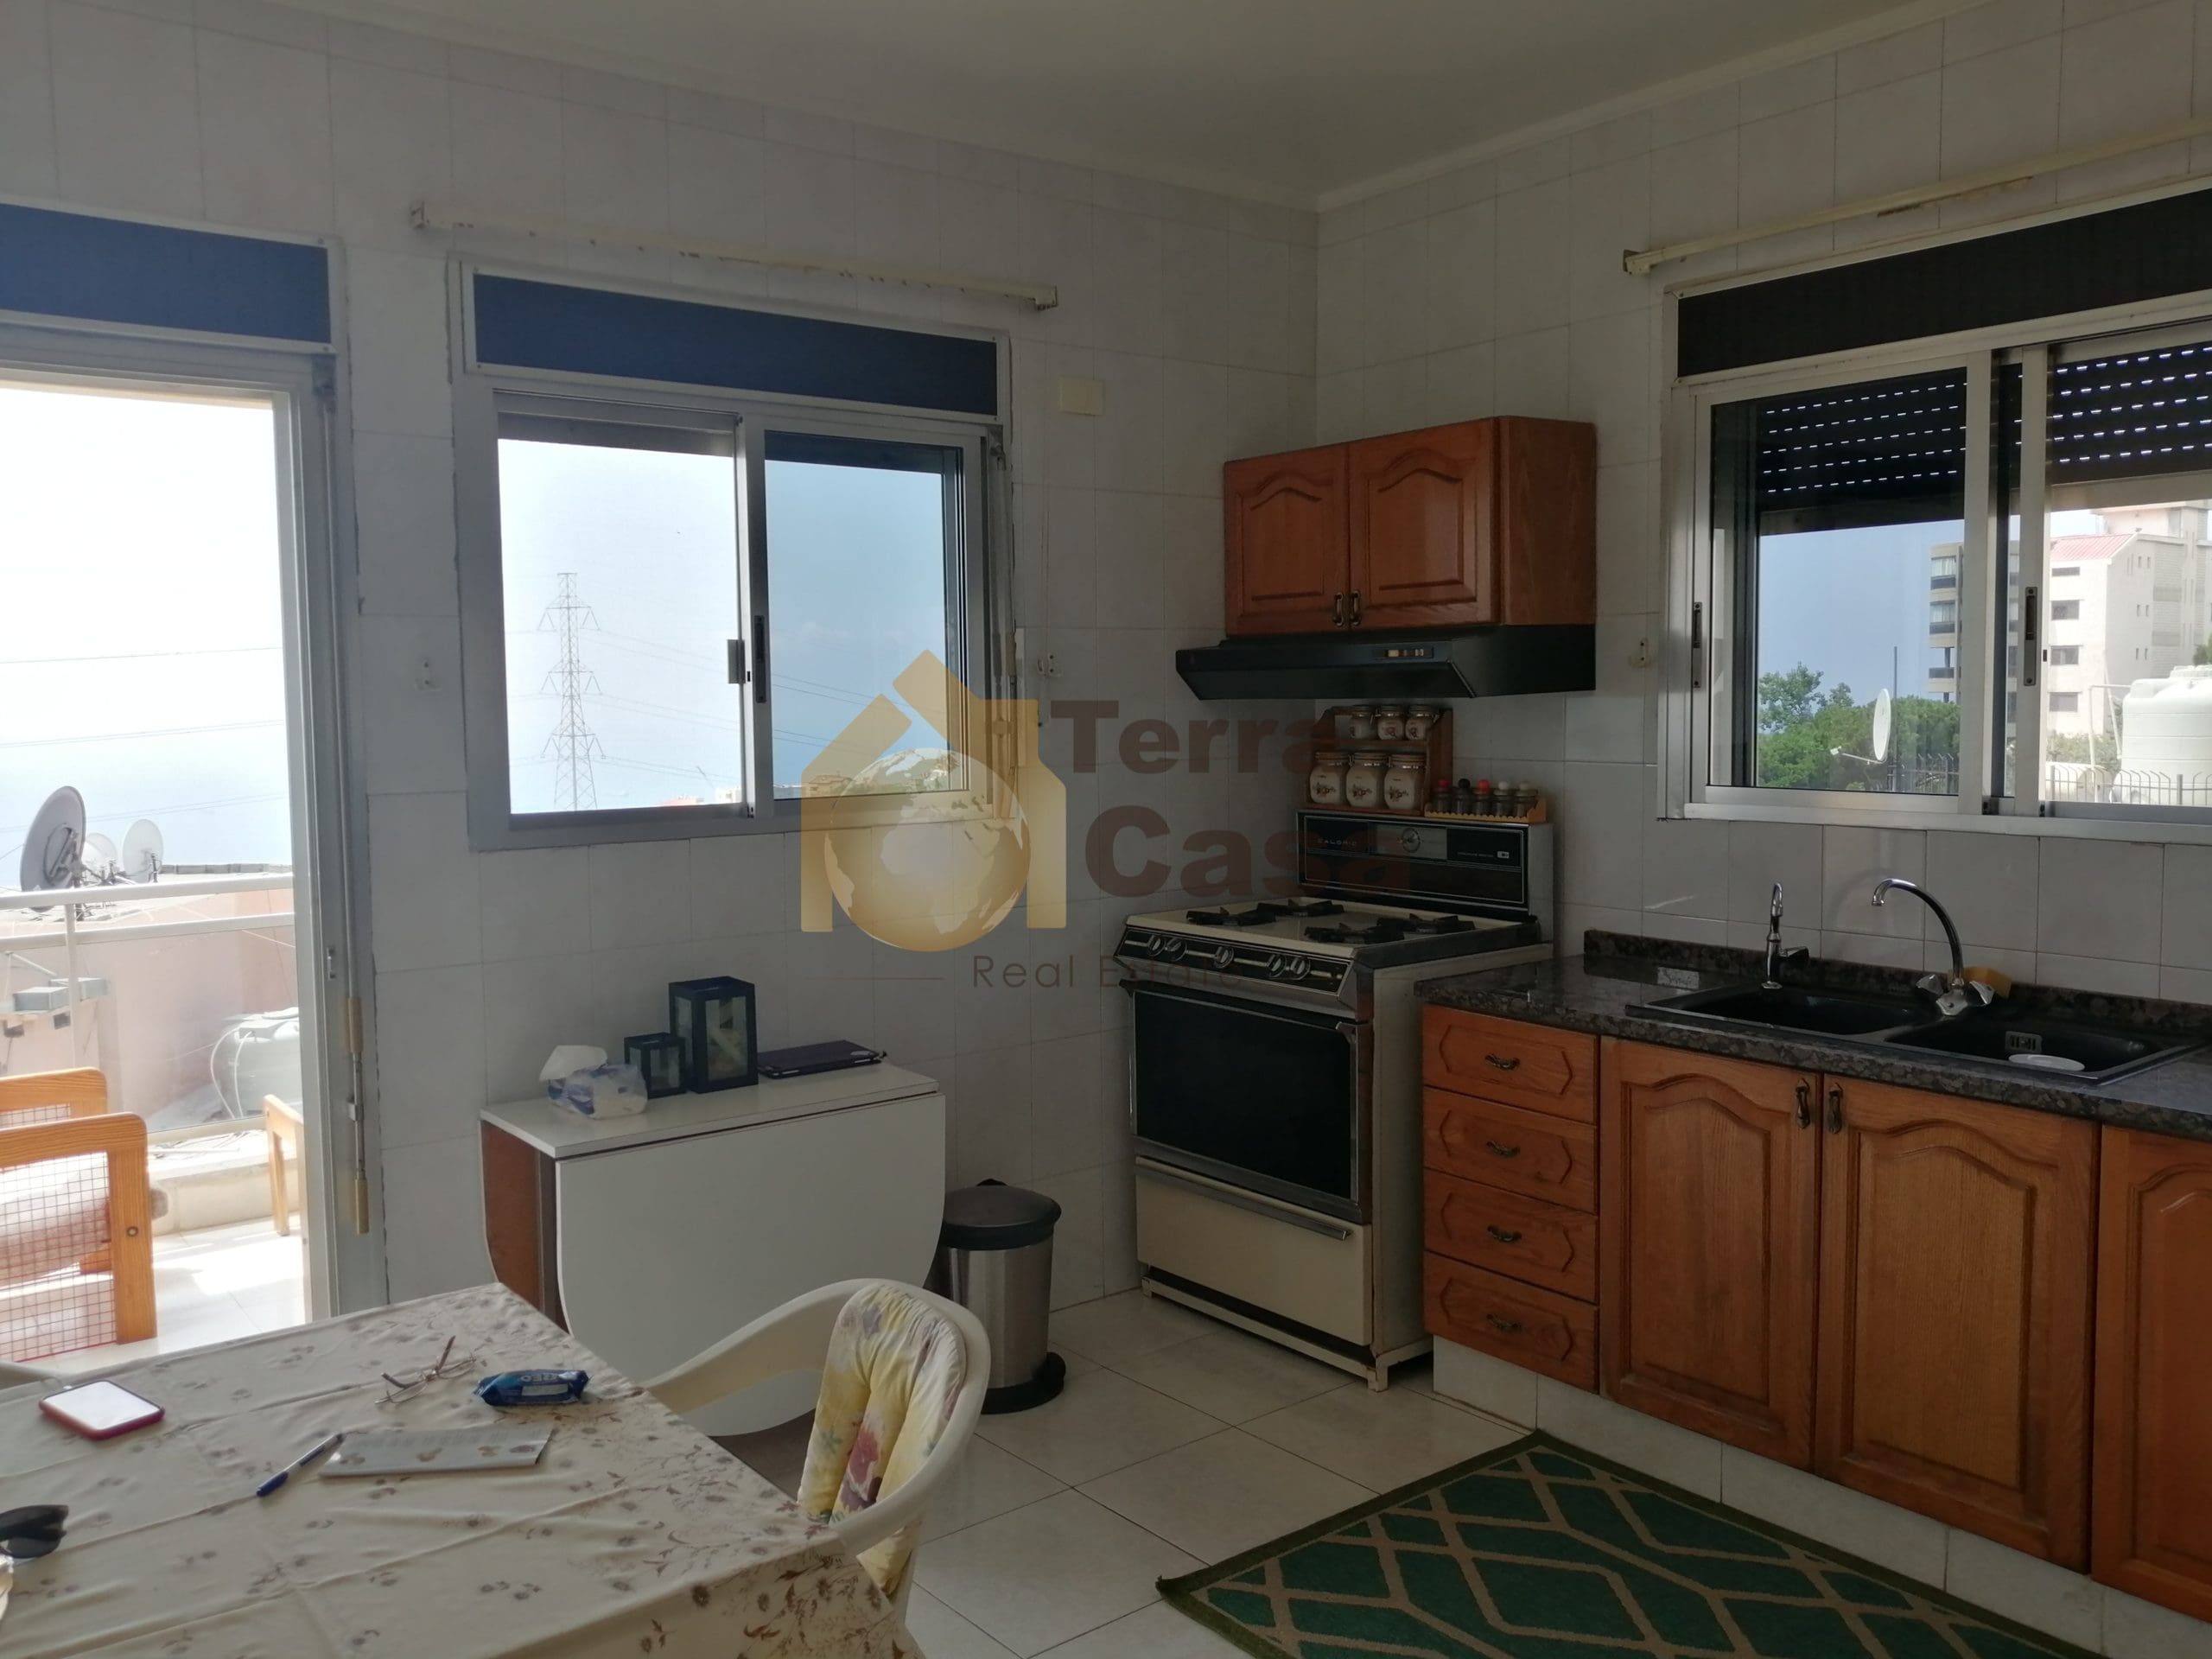 Apartment for rent in Beit el chaar fully furnished open sea view one unit per floor.